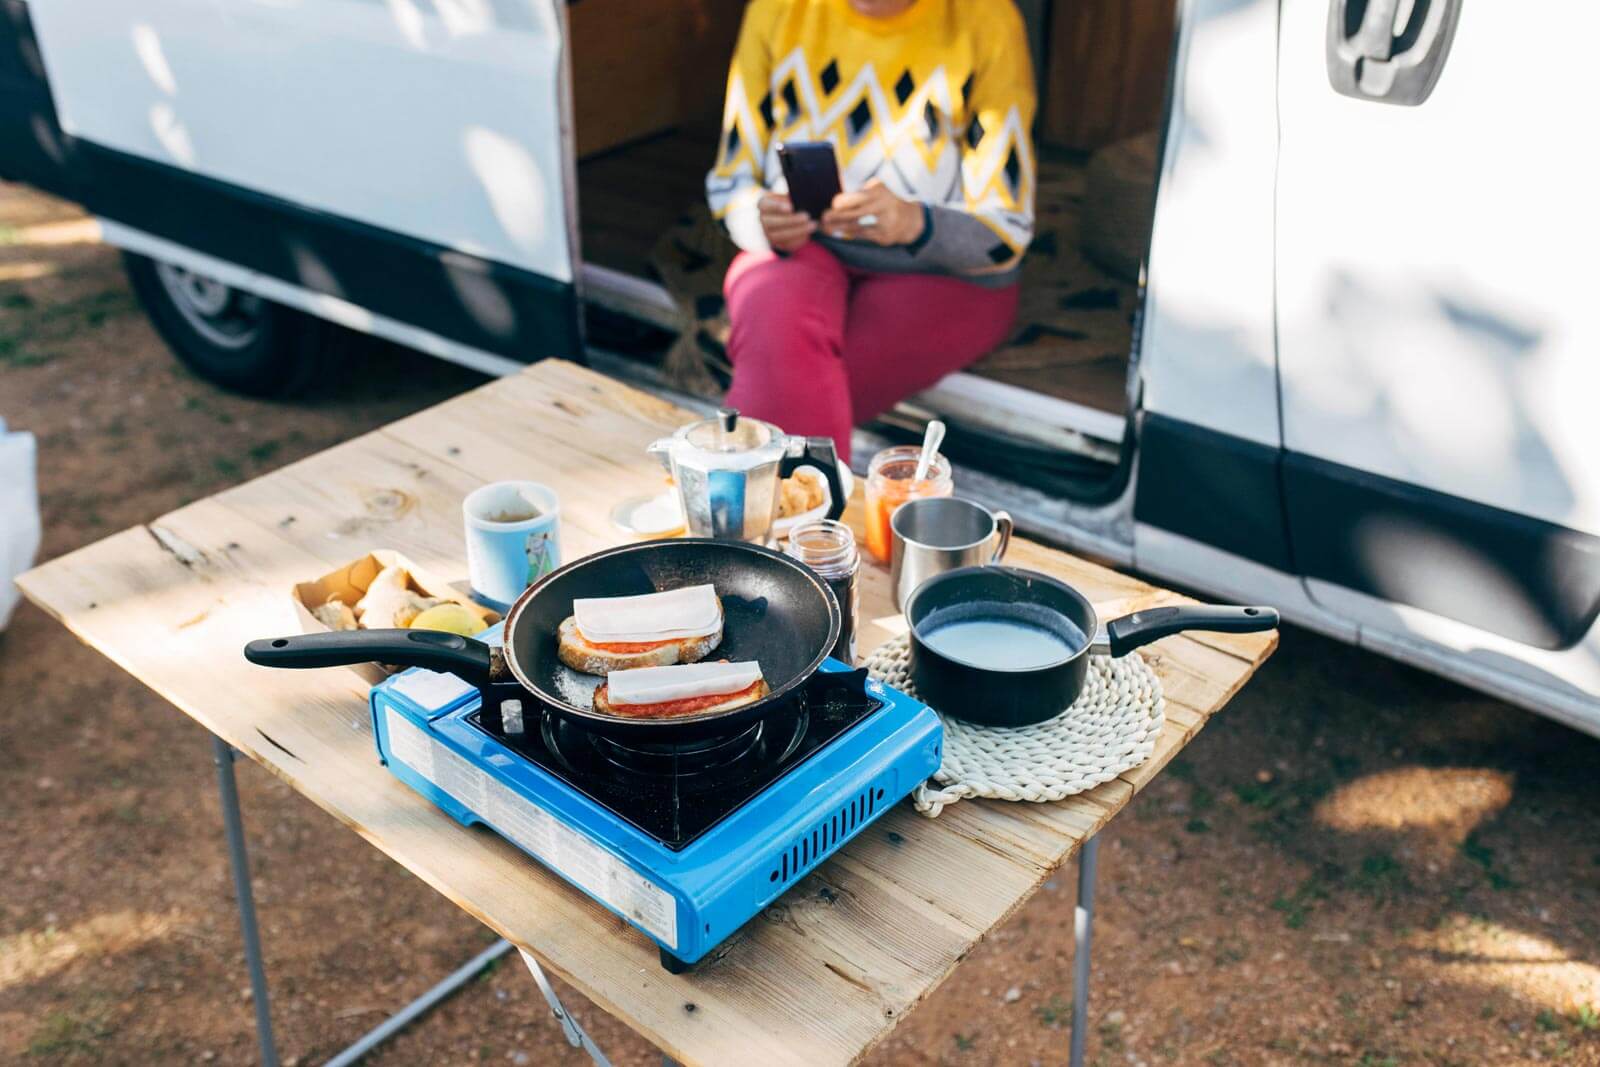 Campsite setup with outdoor kitchen setup.